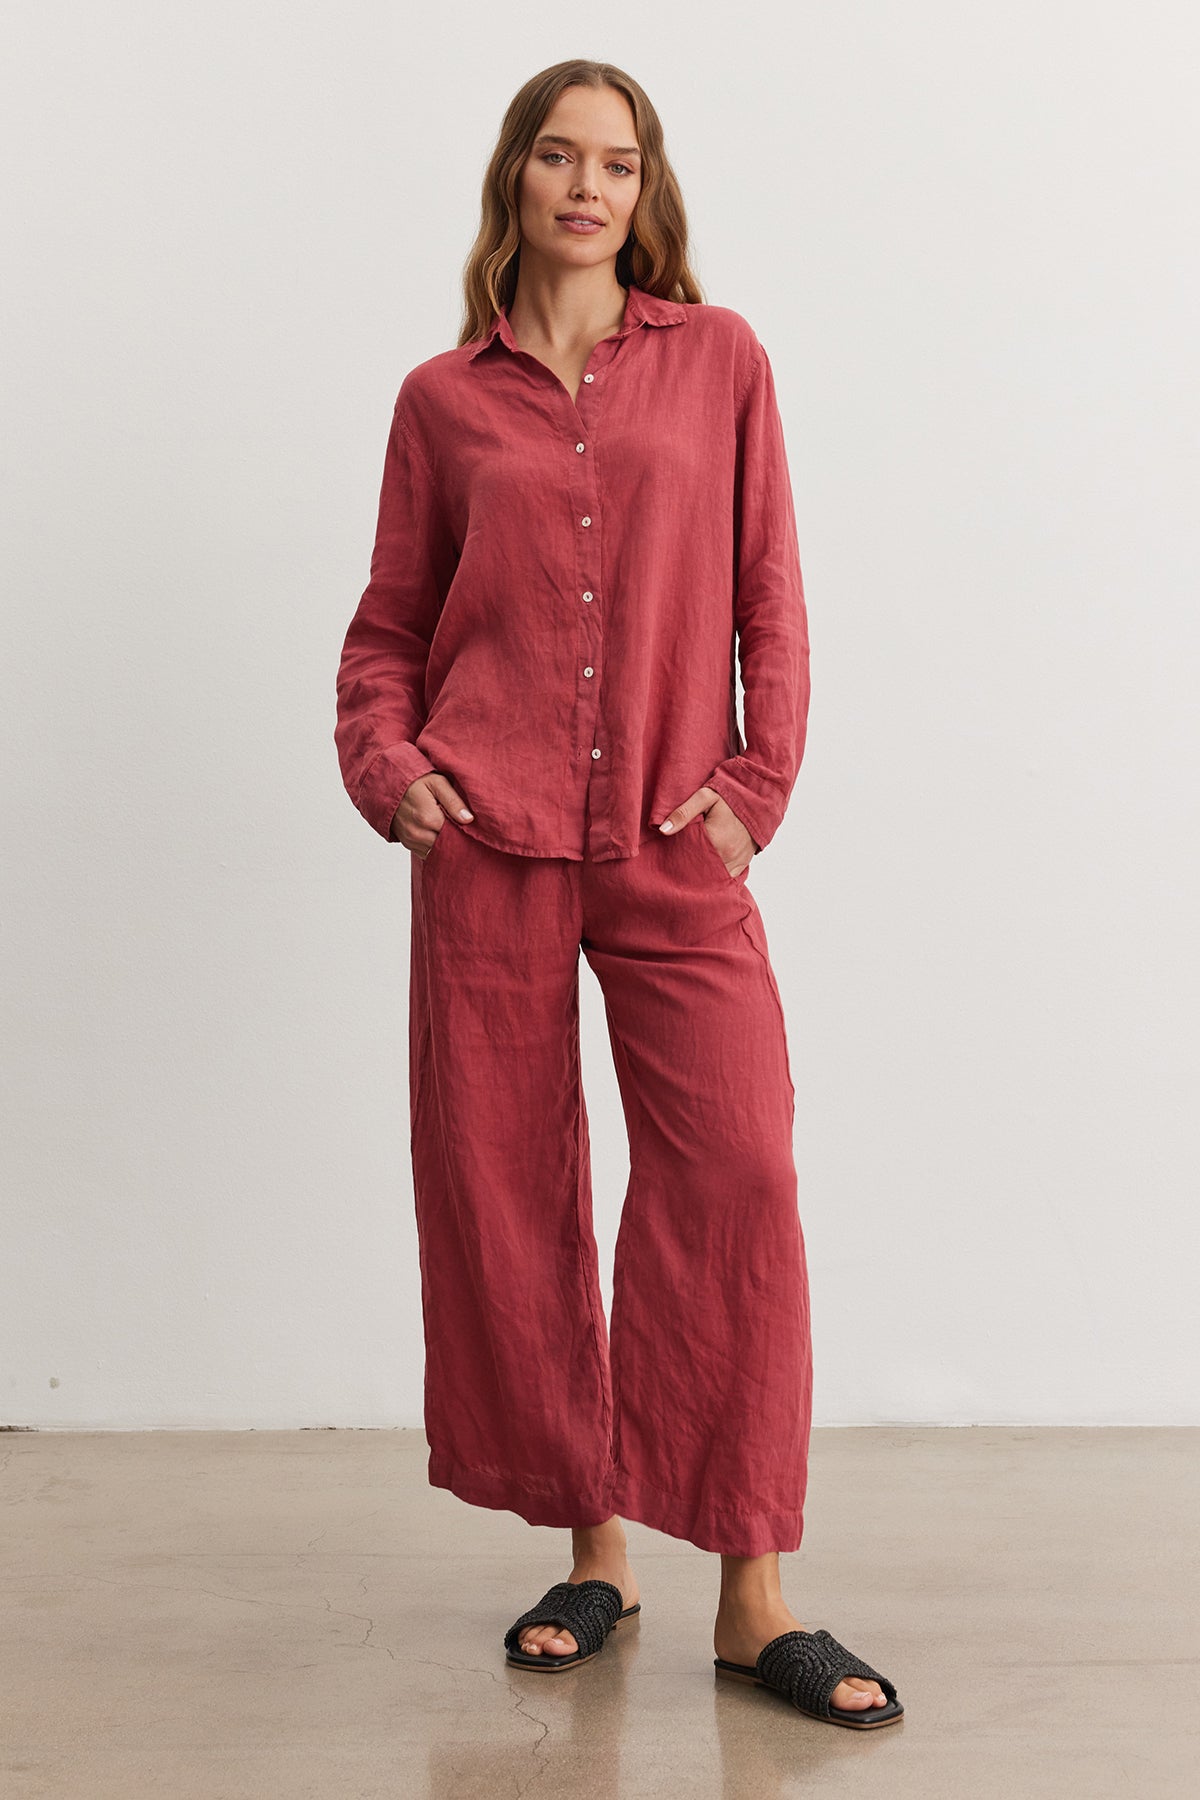 A woman standing in a studio wearing LOLA LINEN PANT by Velvet by Graham & Spencer, a casual red linen shirt and matching linen trousers with an elastic waist, paired with black sandals.-36909573275841